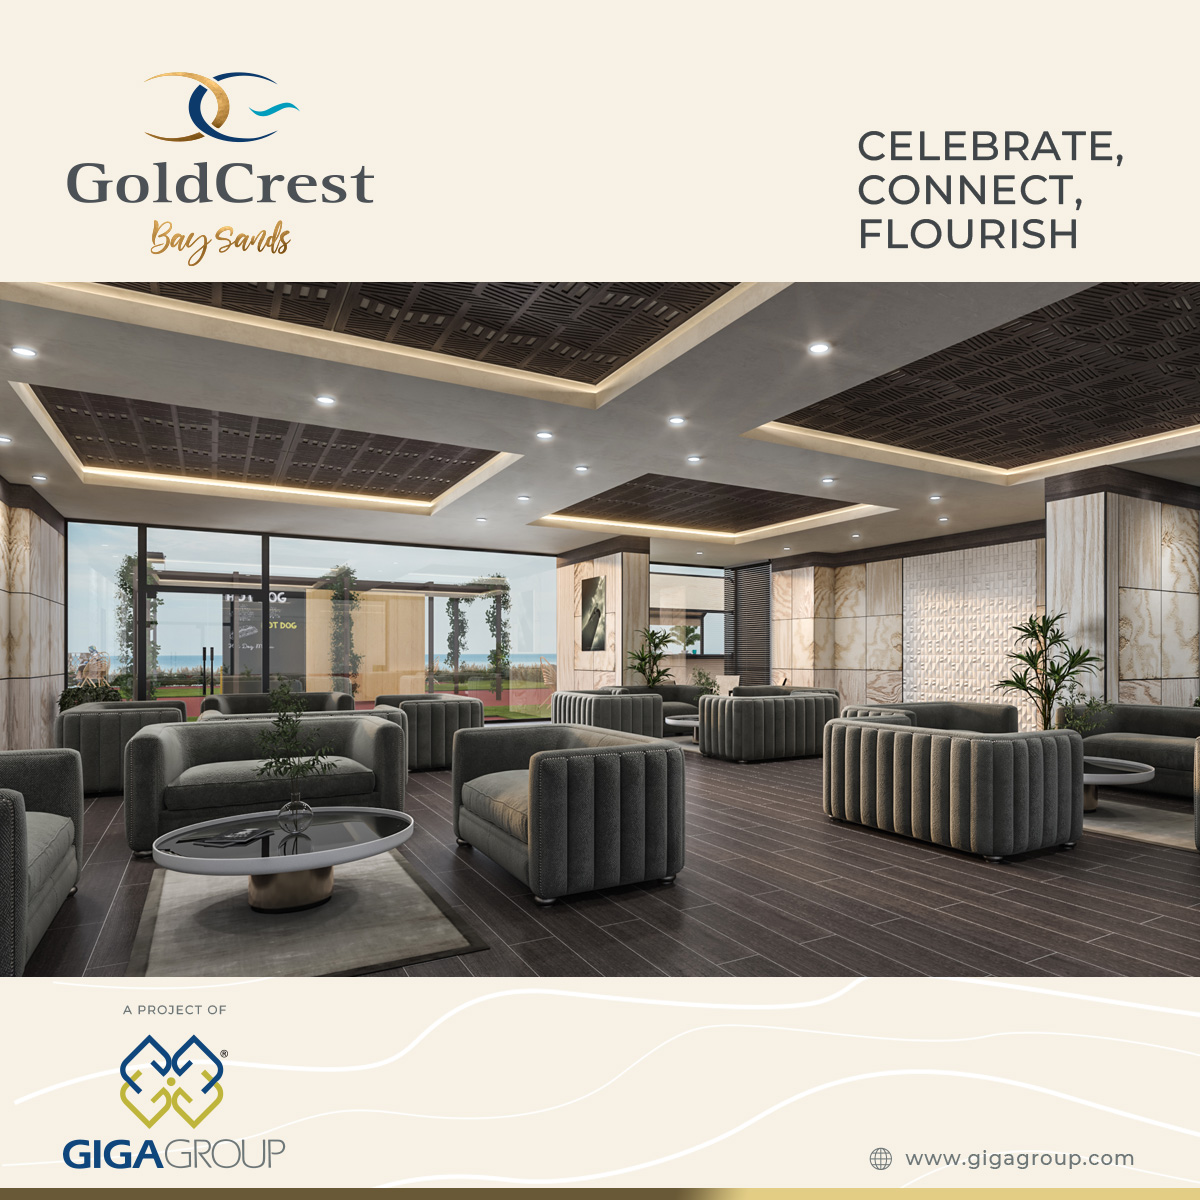 Creating lifelong memories. Our community hall is the heart of social gatherings. Providing a welcoming space for celebrations and community connections.

#goldcrestbaysands #gigagroup #hmrwaterfront #karachi #communityhall #pakistan #residentialapartments #LuxuryLiving